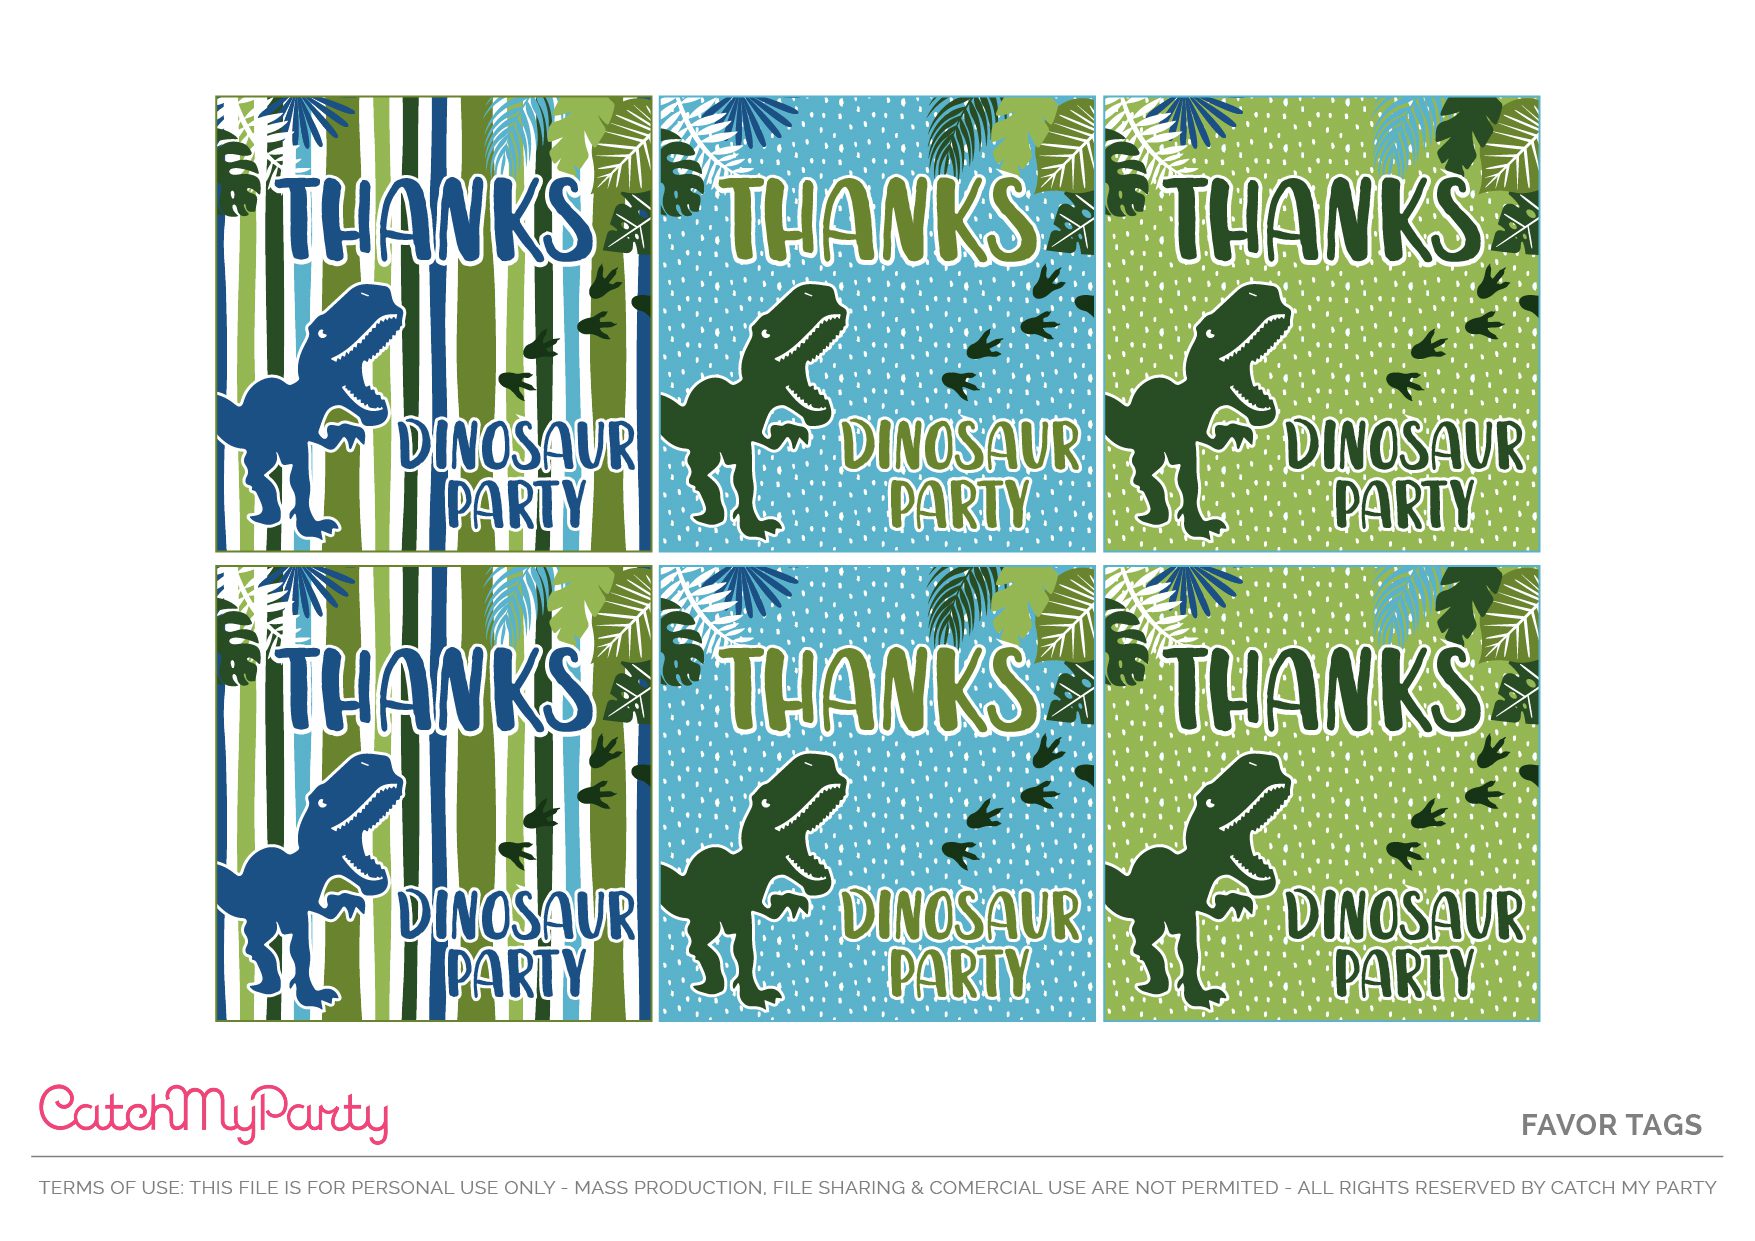 Download These Free Dinosaur Party Printables - Party Favor Tags